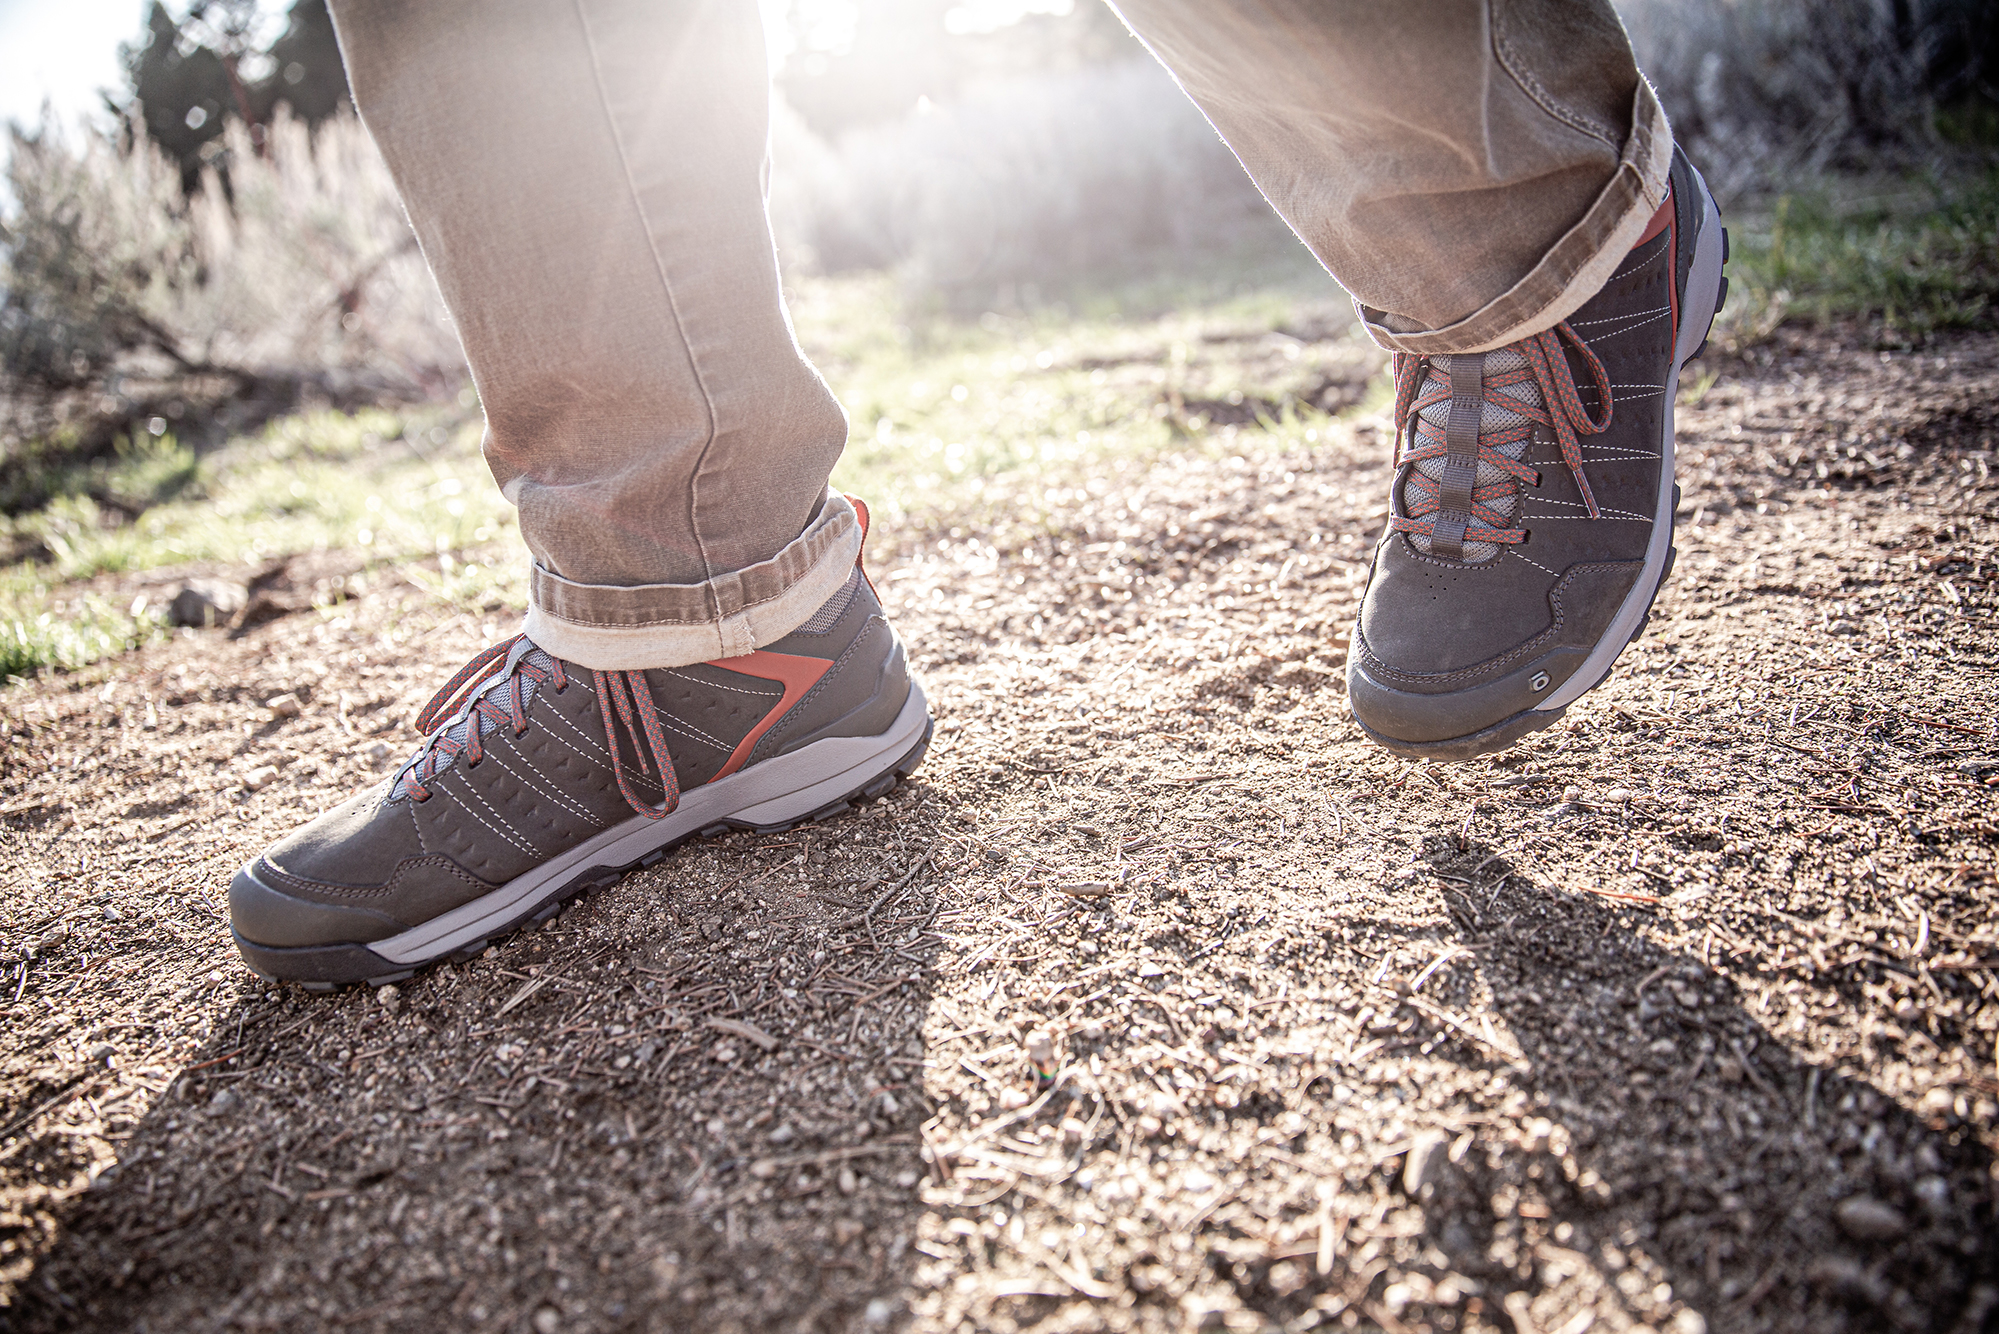 The versatile Oboz Sypes Low Leather hiking shoe on foot.